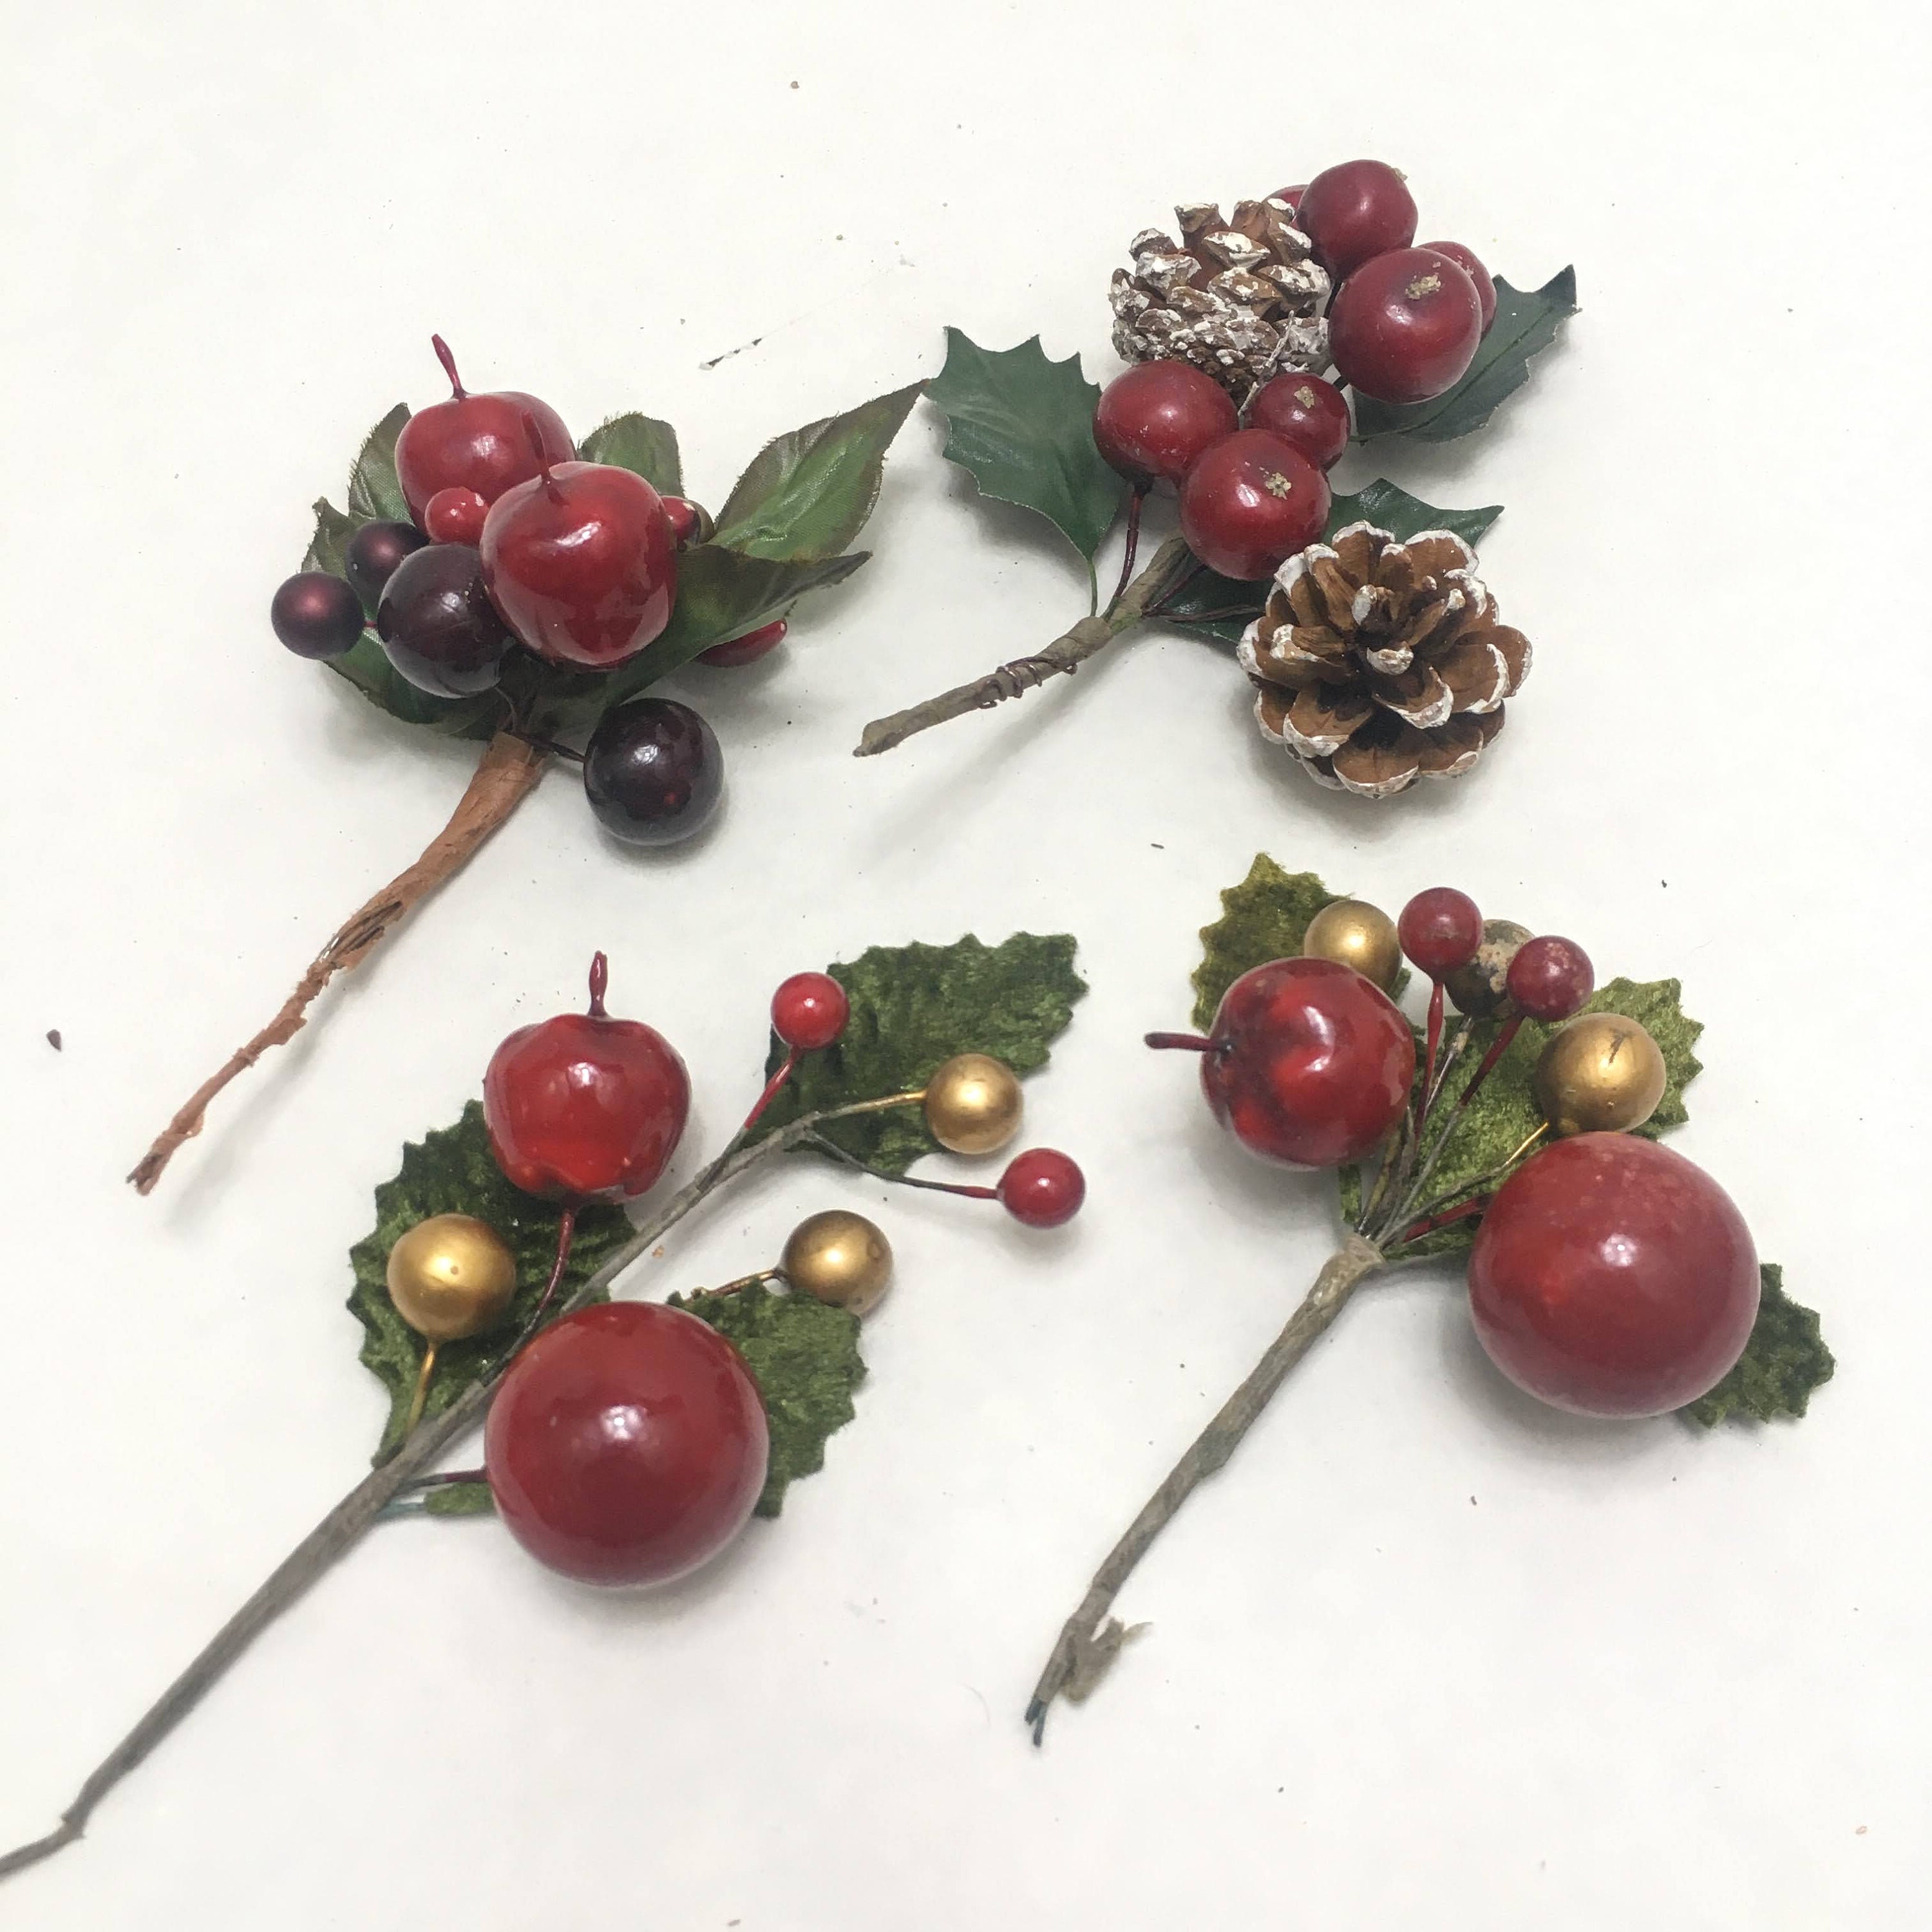 4 Natural Styled Floral Picks in Red Green and Gold Accents Cherry, Berries  and Pine Cone Christmas Gift Cluster Millinery Winter Decor 